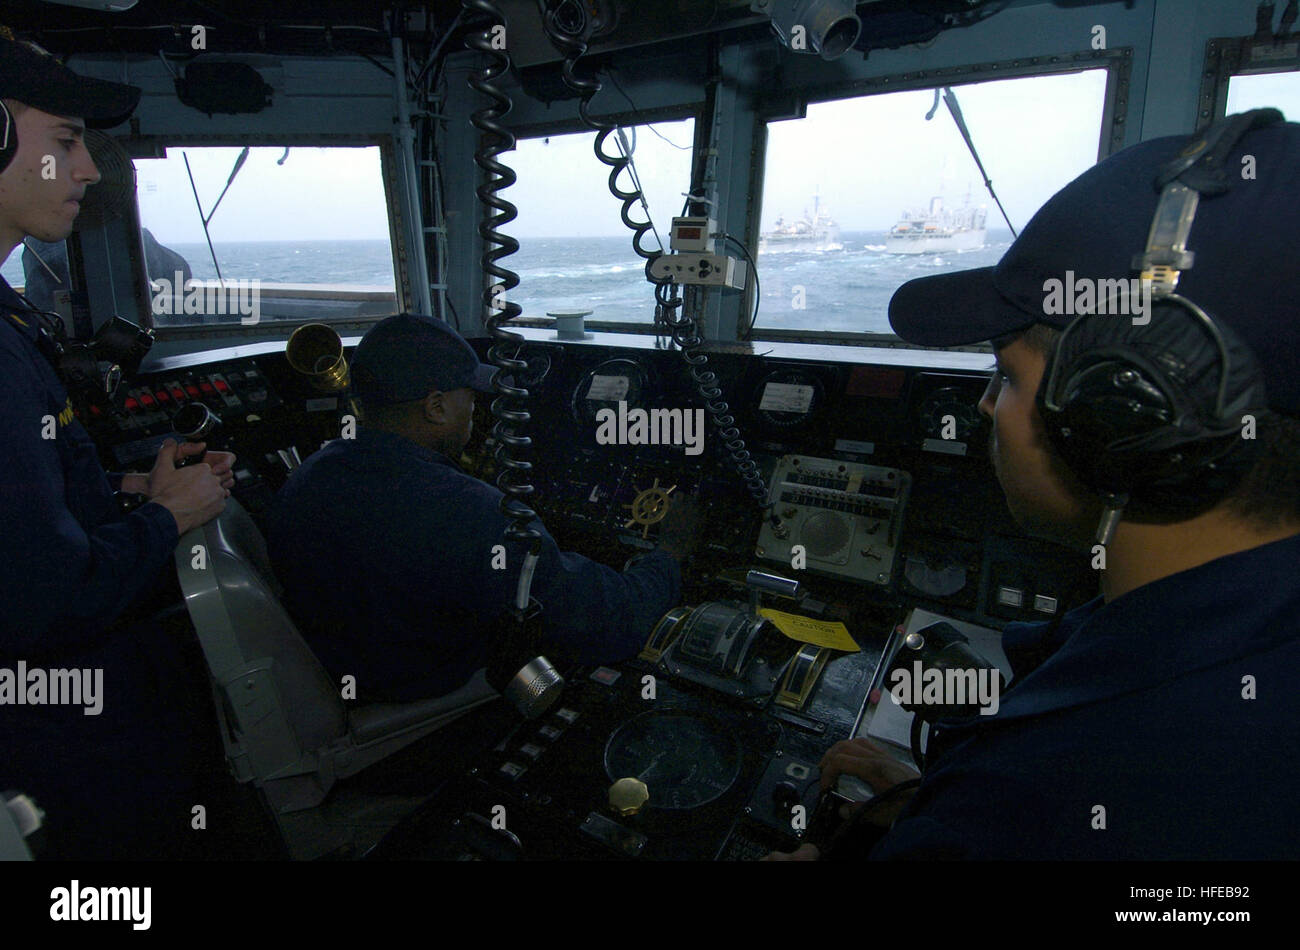 050324-N-6932B-016 Persian Gulf (Mar. 24, 2005) - Lee Helmsman, Seaman Christopher Herrera and Helmsman, Seaman Donte Tidwell, both assigned to the guided missile frigate USS Thach (FFG 43), control the ships approach to the fast combat support ship USS Camden (AOE 2) and the amphibious transport dock ship USS Duluth (LPD 6). The three ships will be conducting simultaneous under-way replenishment operations. Thach and Duluth are currently participating in exercise Arabian Gauntlet 2005. Arabian Gauntlet is a multi-lateral surface, air and mine countermeasure exercise designed to practice marit Stock Photo